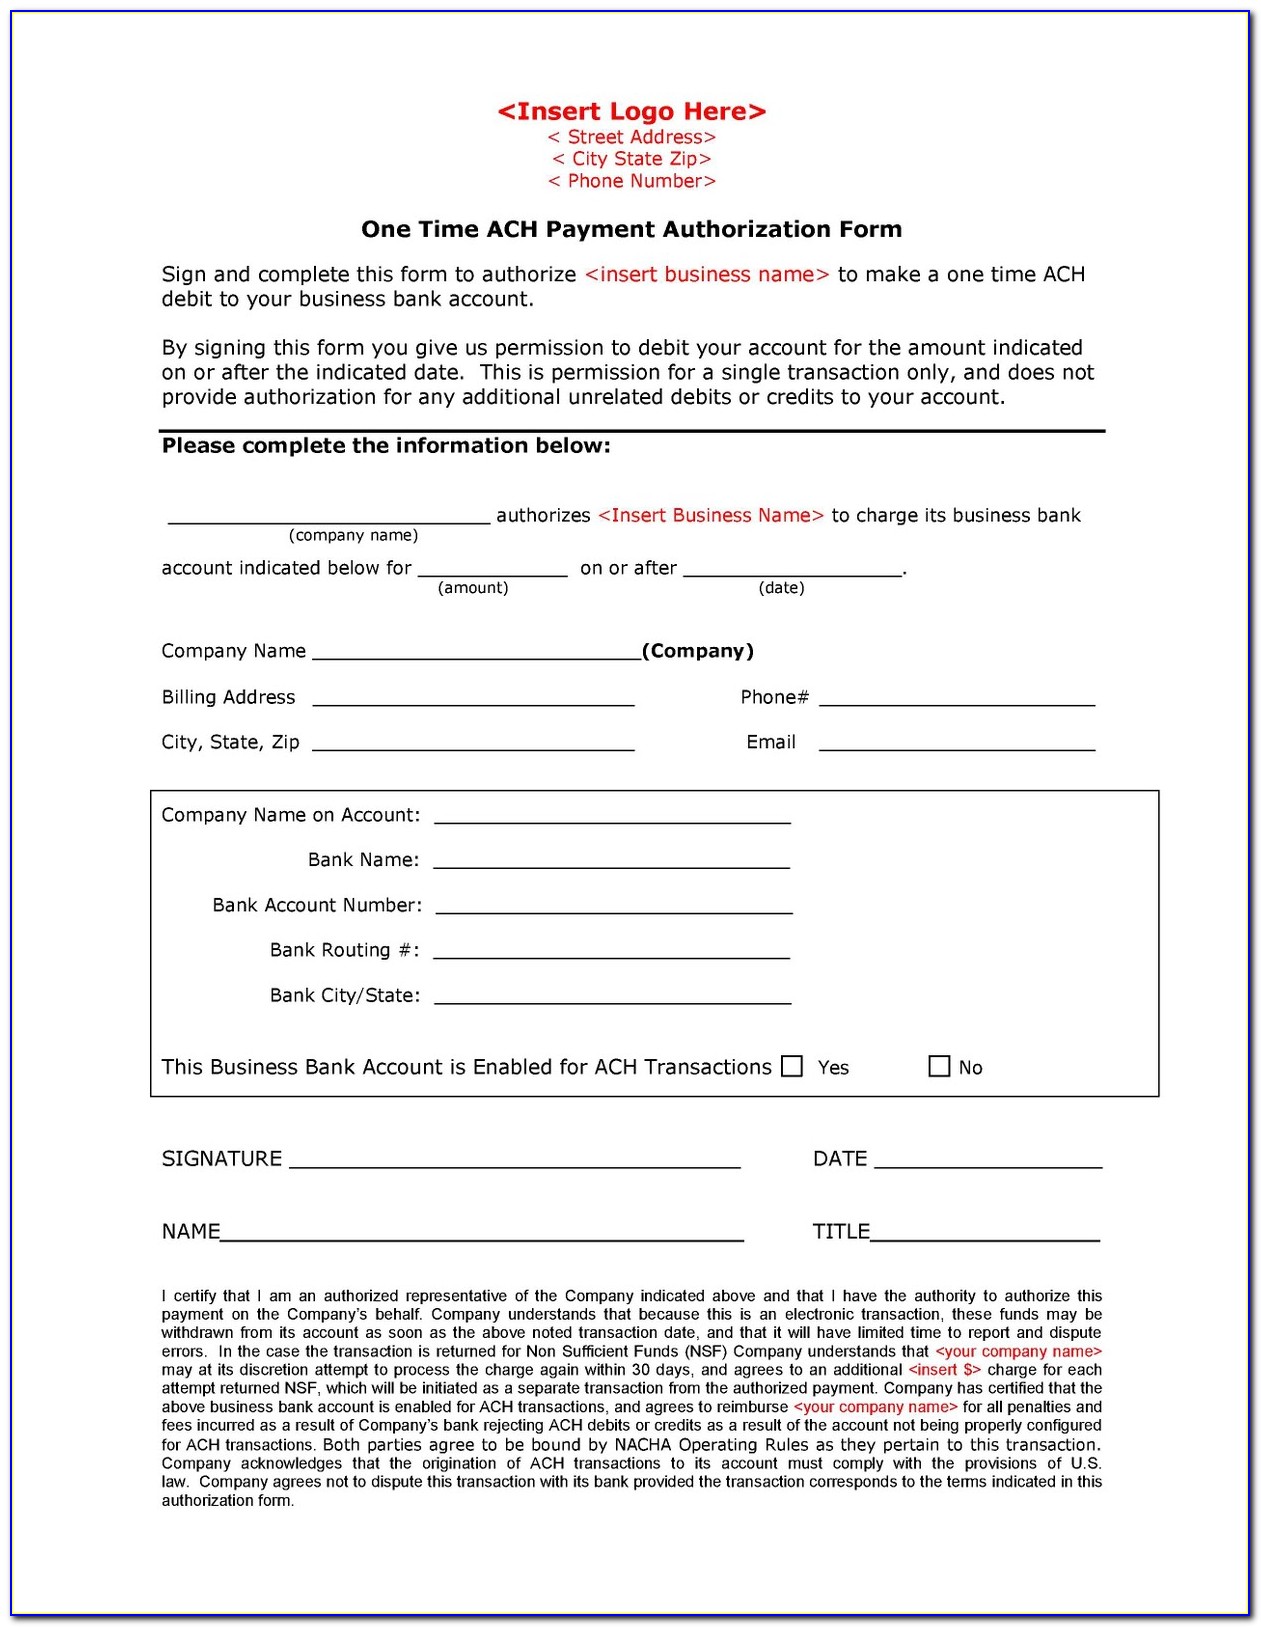 Direct Payment Authorization Form Template